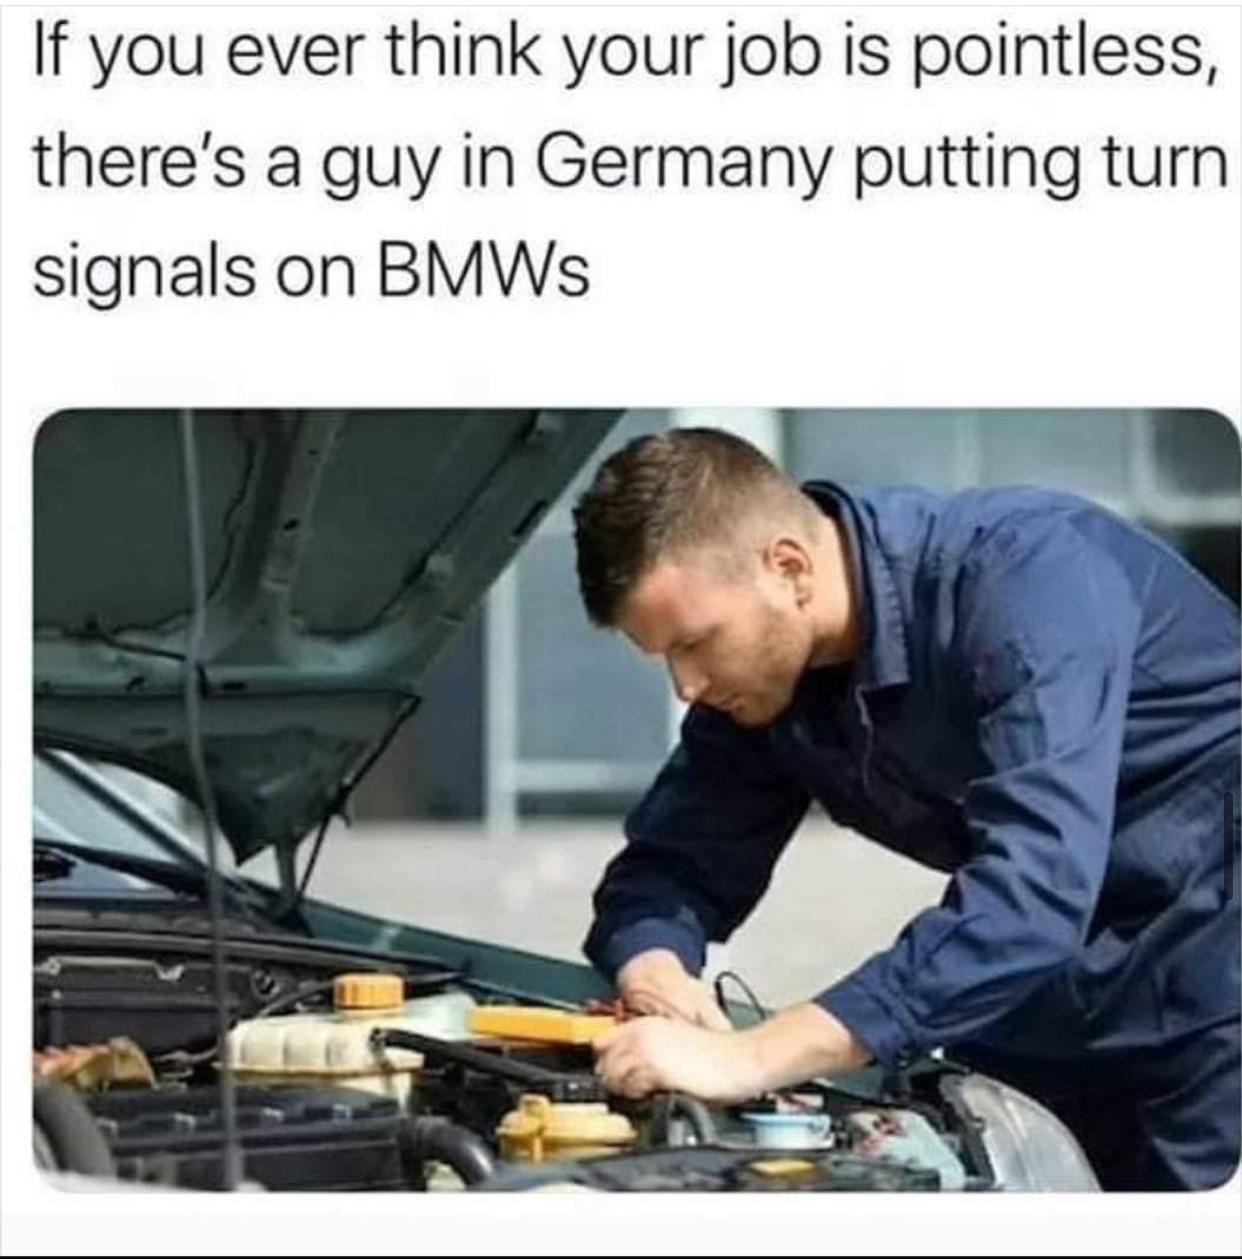 mechanic repairing car on road trip - If you ever think your job is pointless, there's a guy in Germany putting turn signals on Bmws